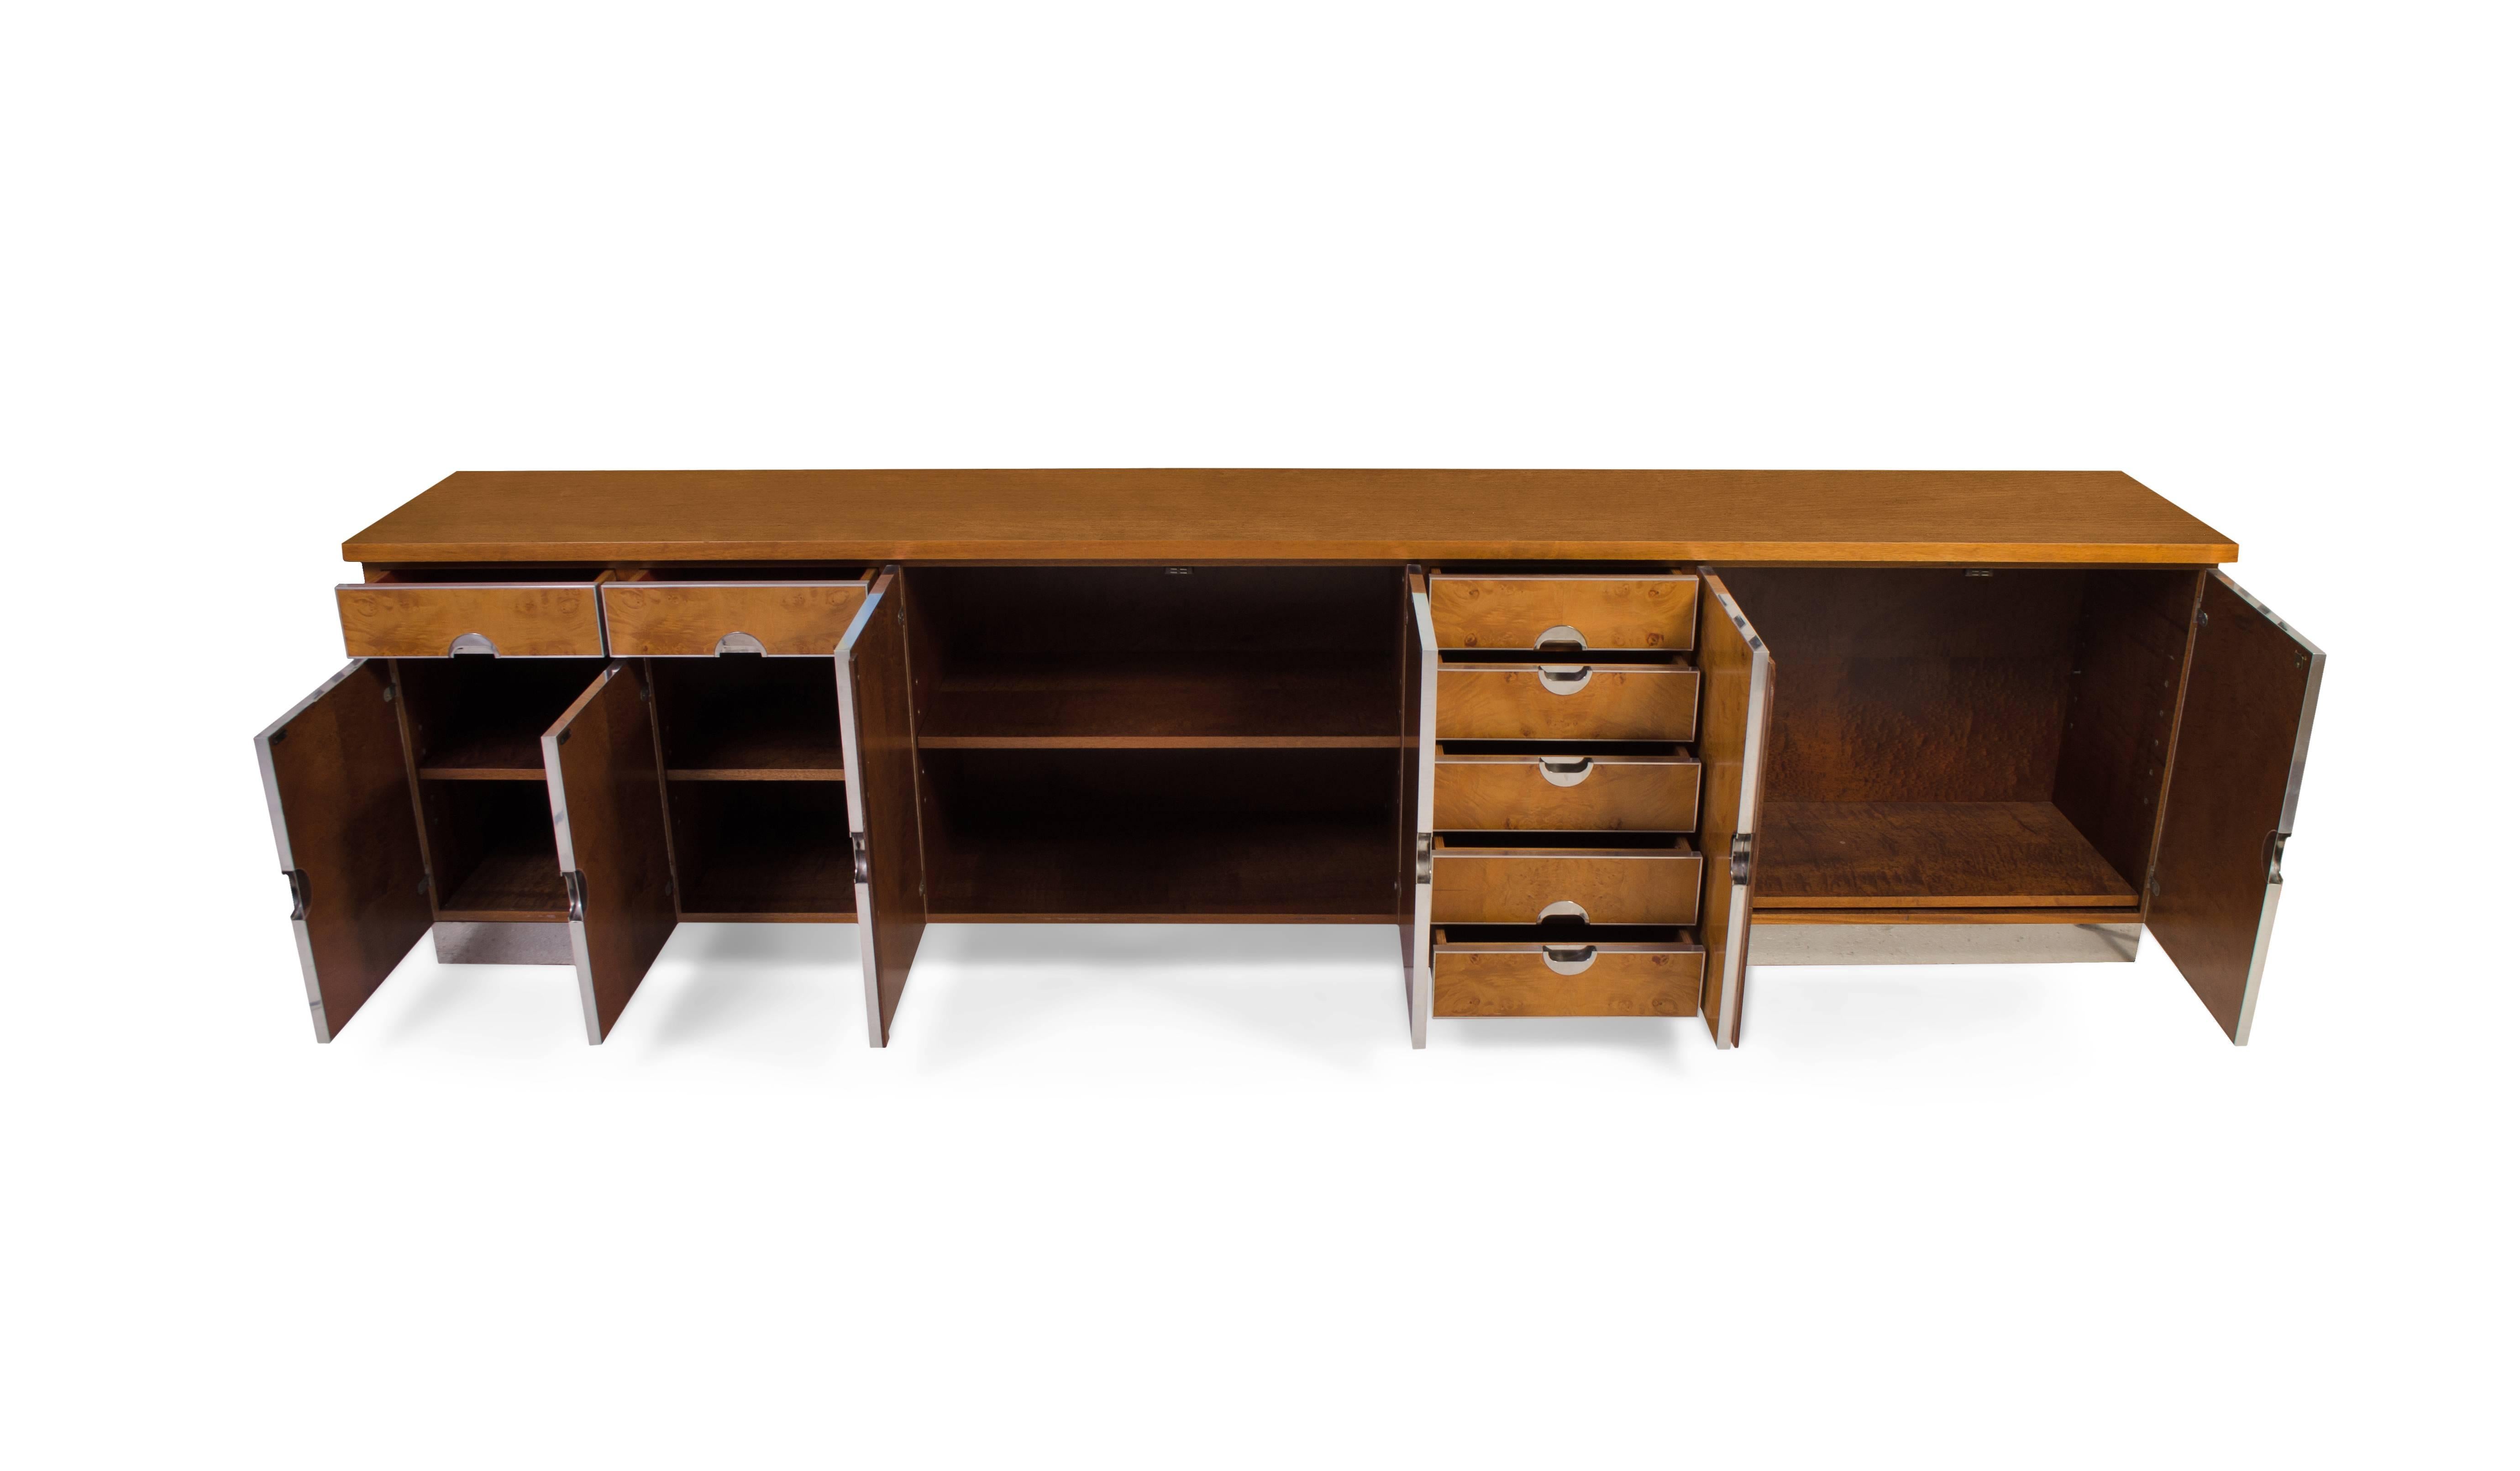 The find of the century. A one of a kind immensely impressive piece of design, from none other than Germany, and the craft is everything one would expect. The generously proportioned design allows for various combinations of doors and drawers.